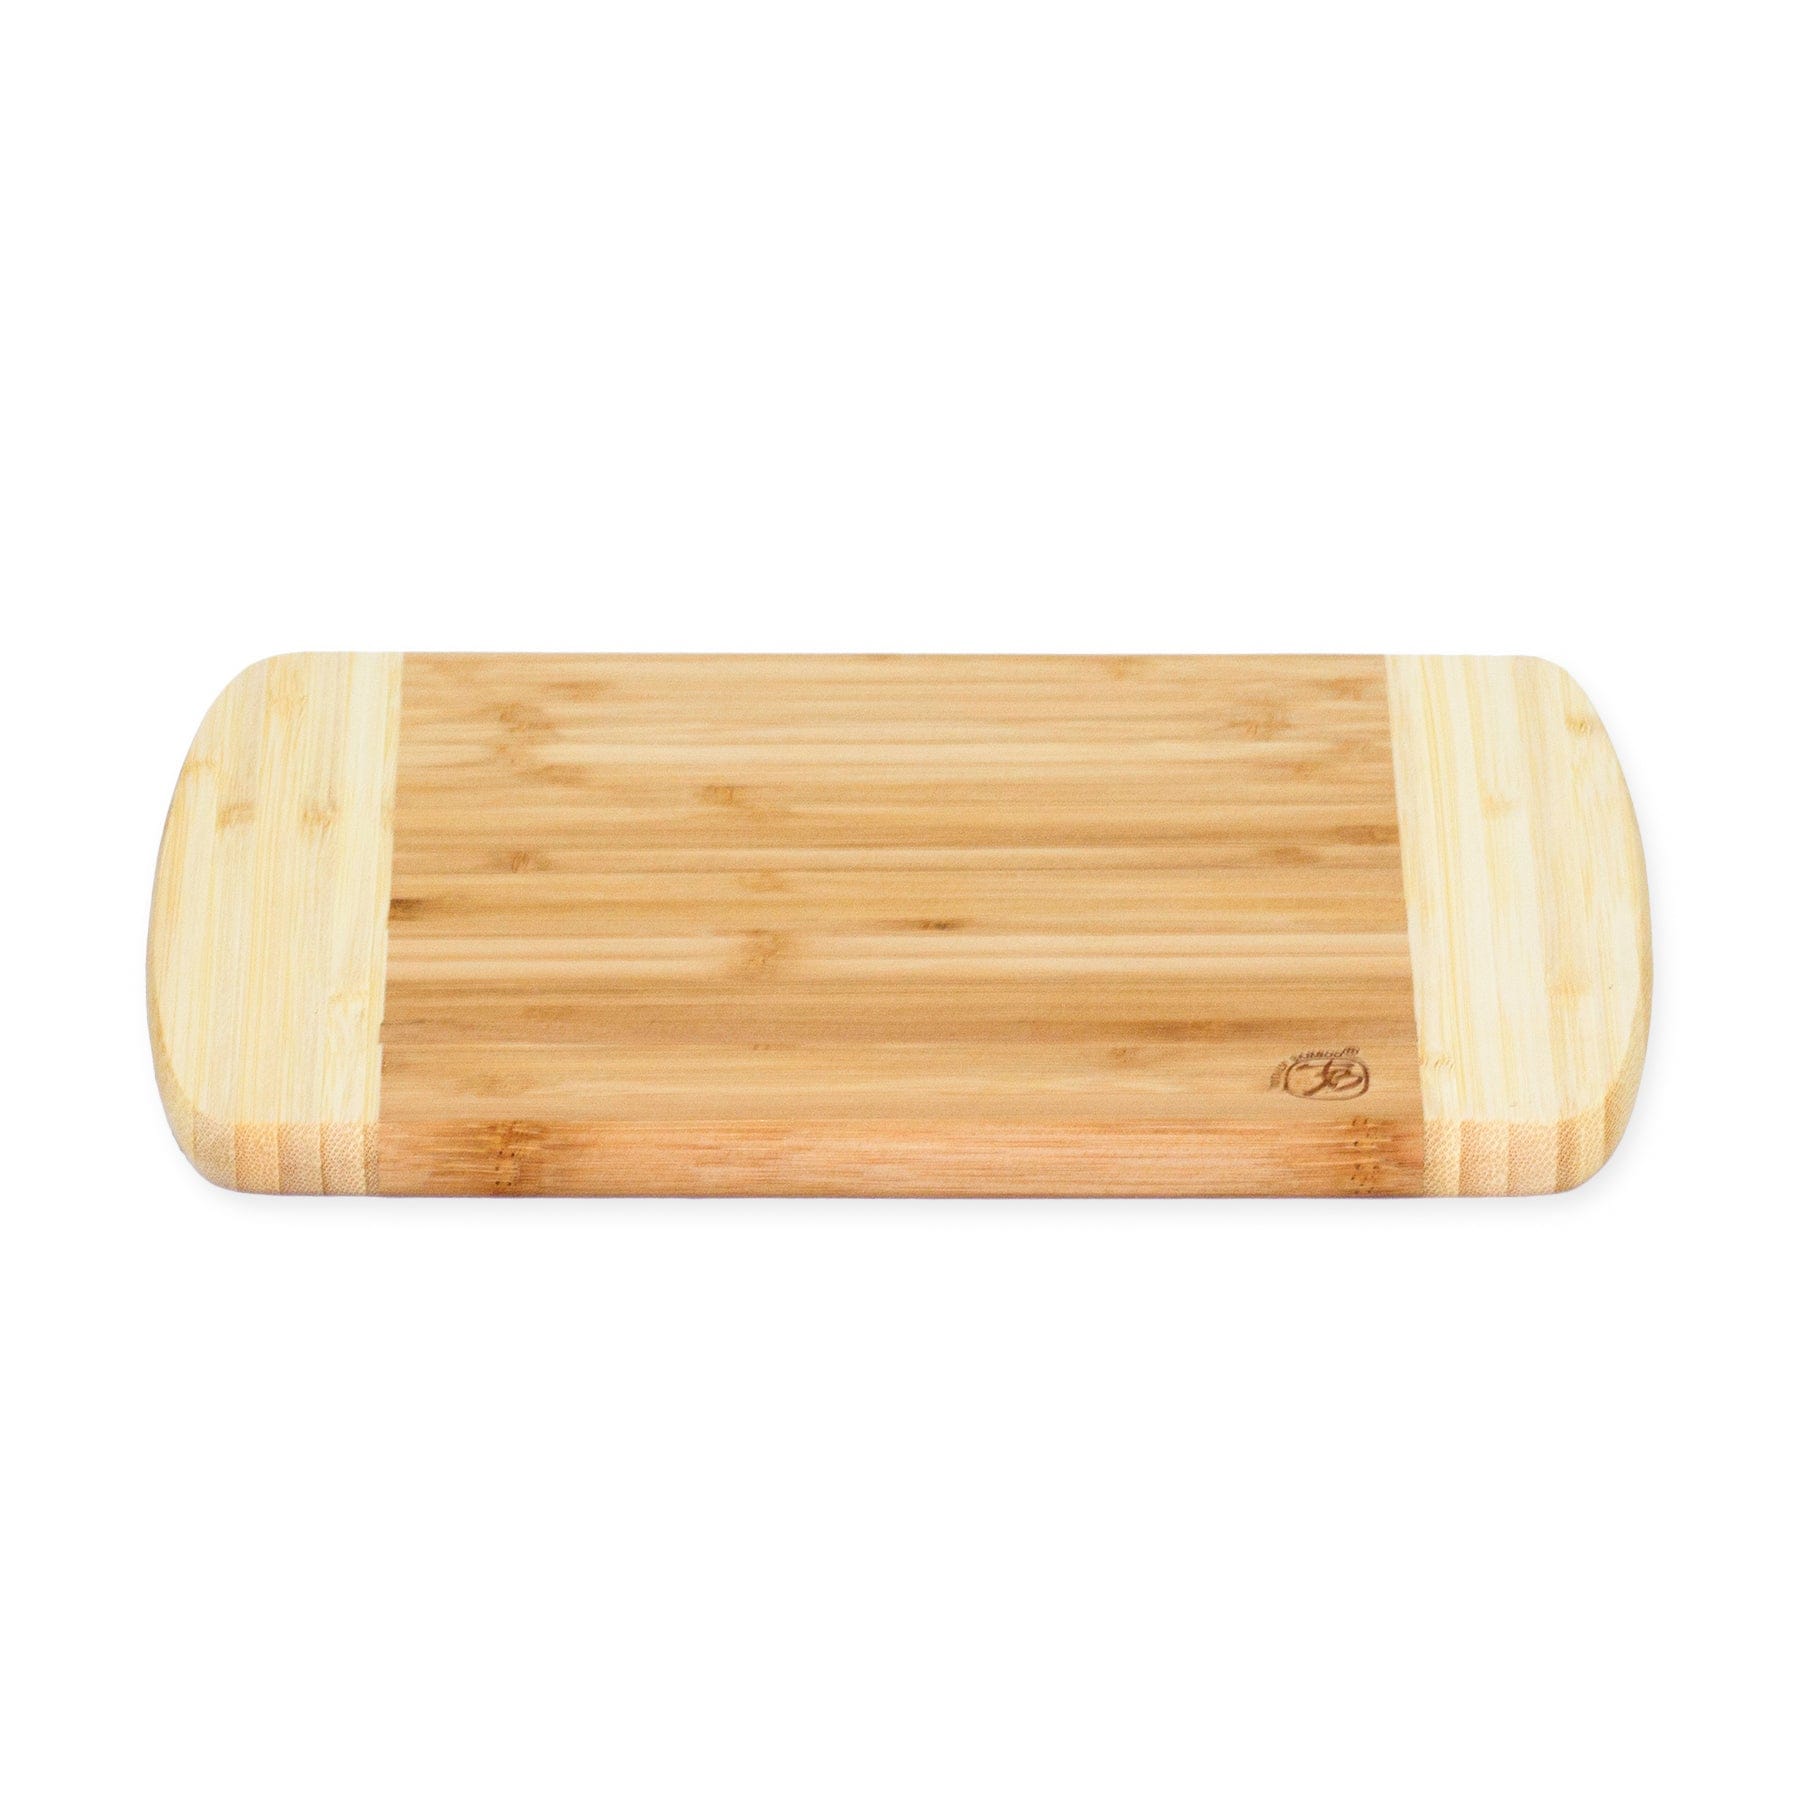 Comprar 7.8 Inches Bamboo Wooden Board for Knitting Crochet and